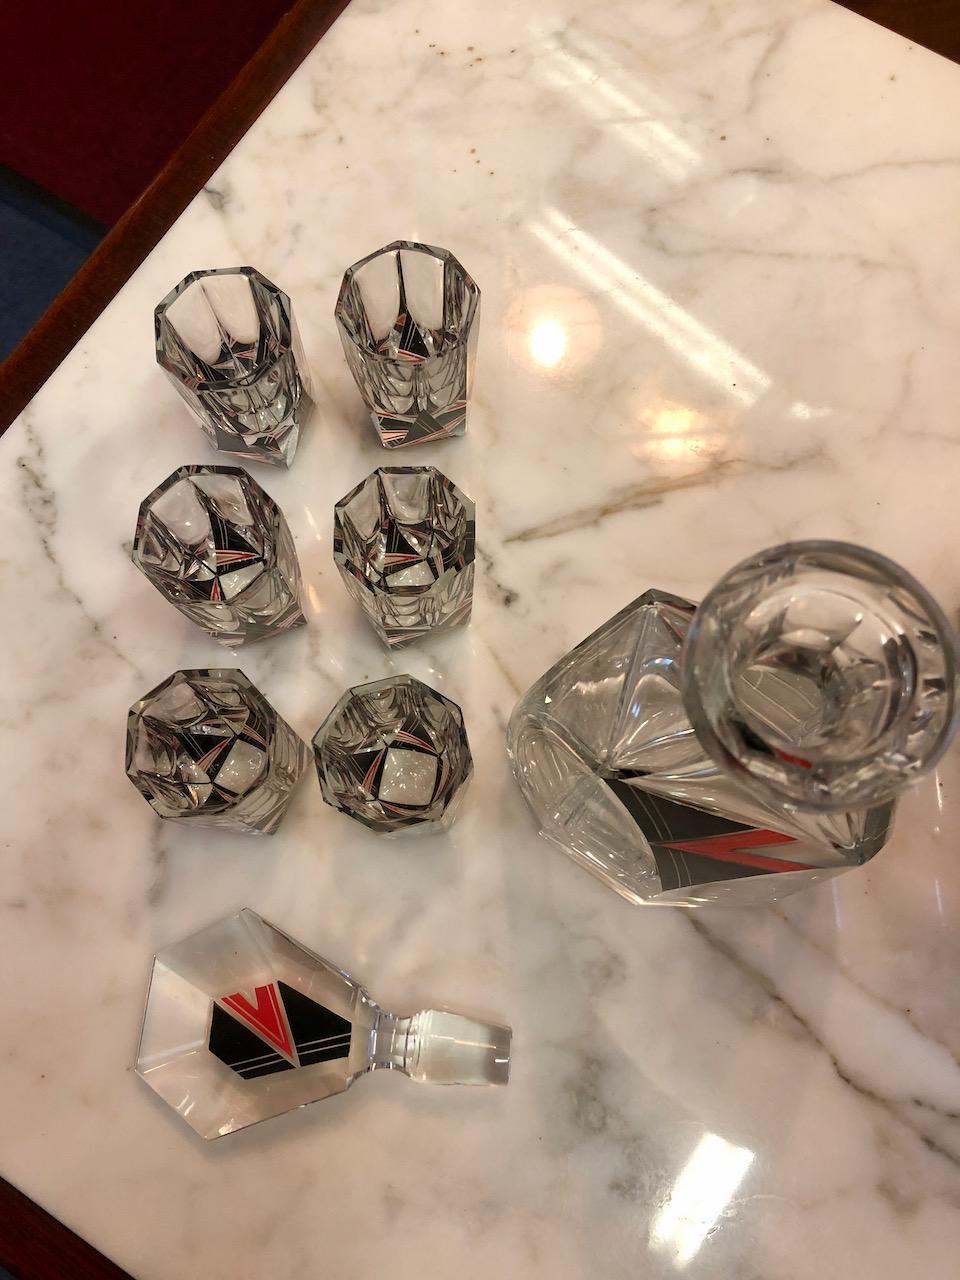 An original 1930s Art Deco decanter set with six glasses by Karl Palda, set in chrome and black glass tray. The design is a striking “lightning bolt” of red and black in high-quality Czechoslovakian crystal. This favorite glass master produced